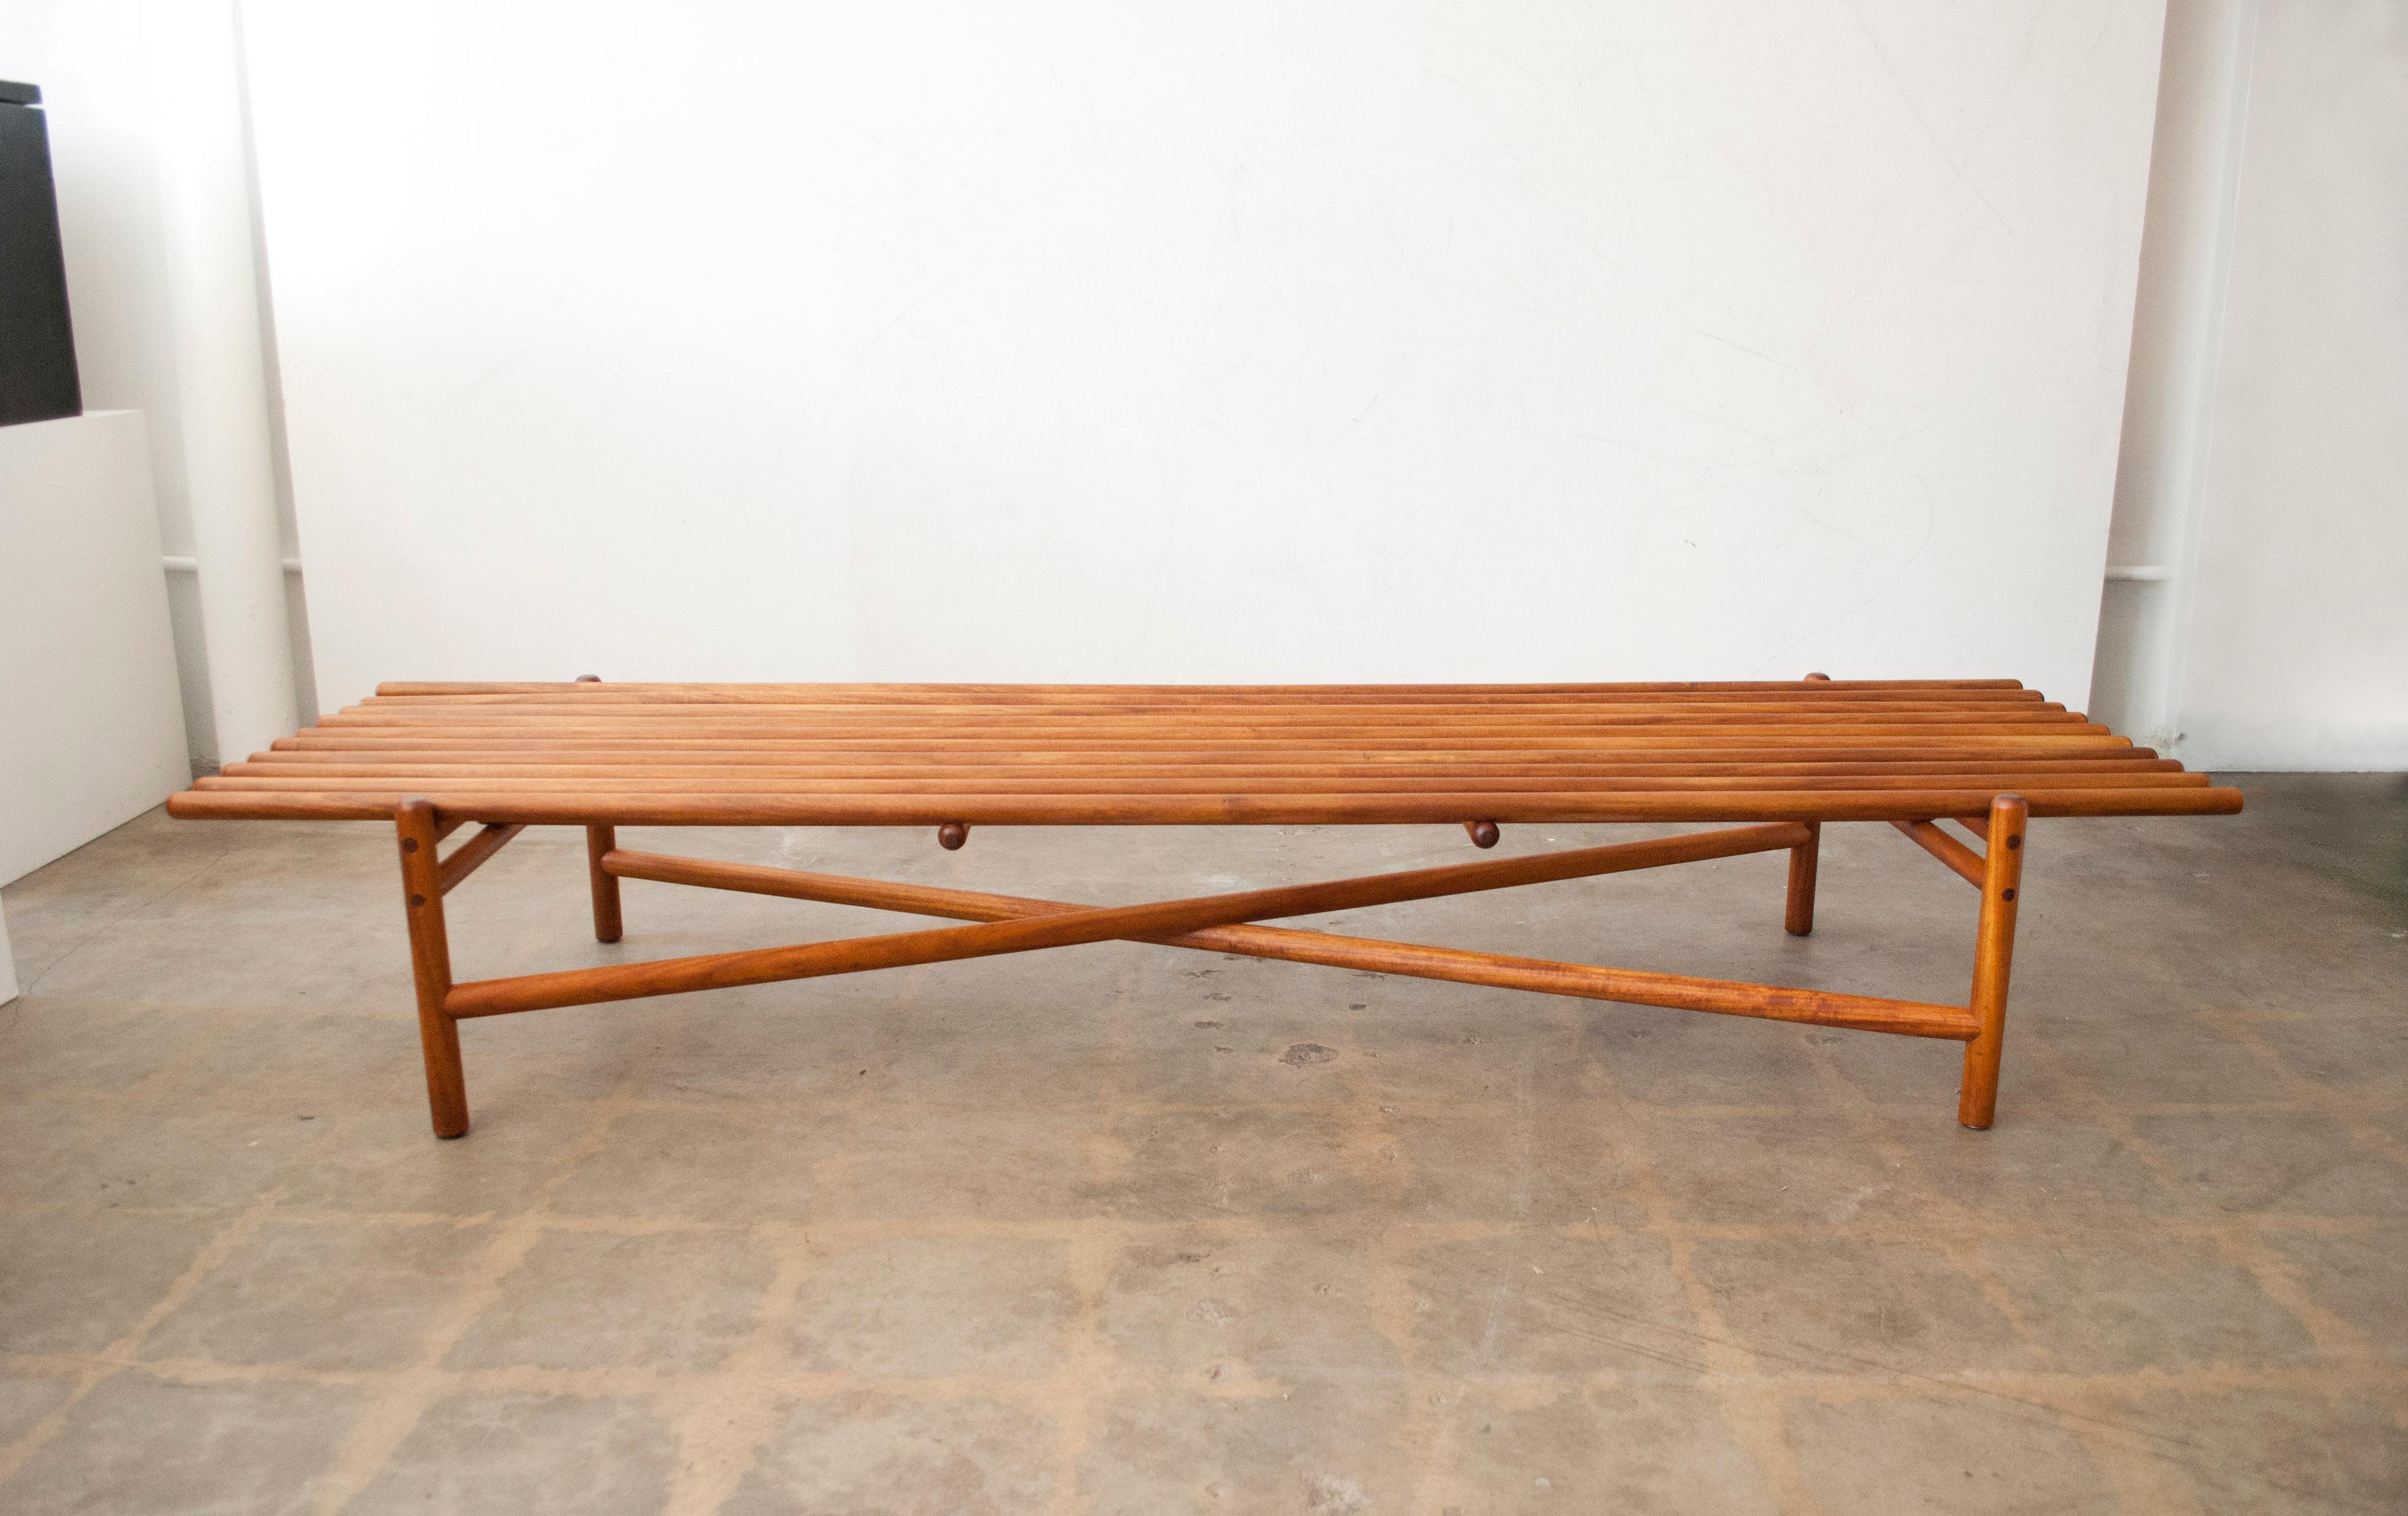 Goldberg's furniture designs were custom made for specific interiors. The dowel bench was used in several projects from 1945-1954.

Architect Bertrand Goldberg was born in 1913 in Chicago, Illinois. He received his training at several institutions